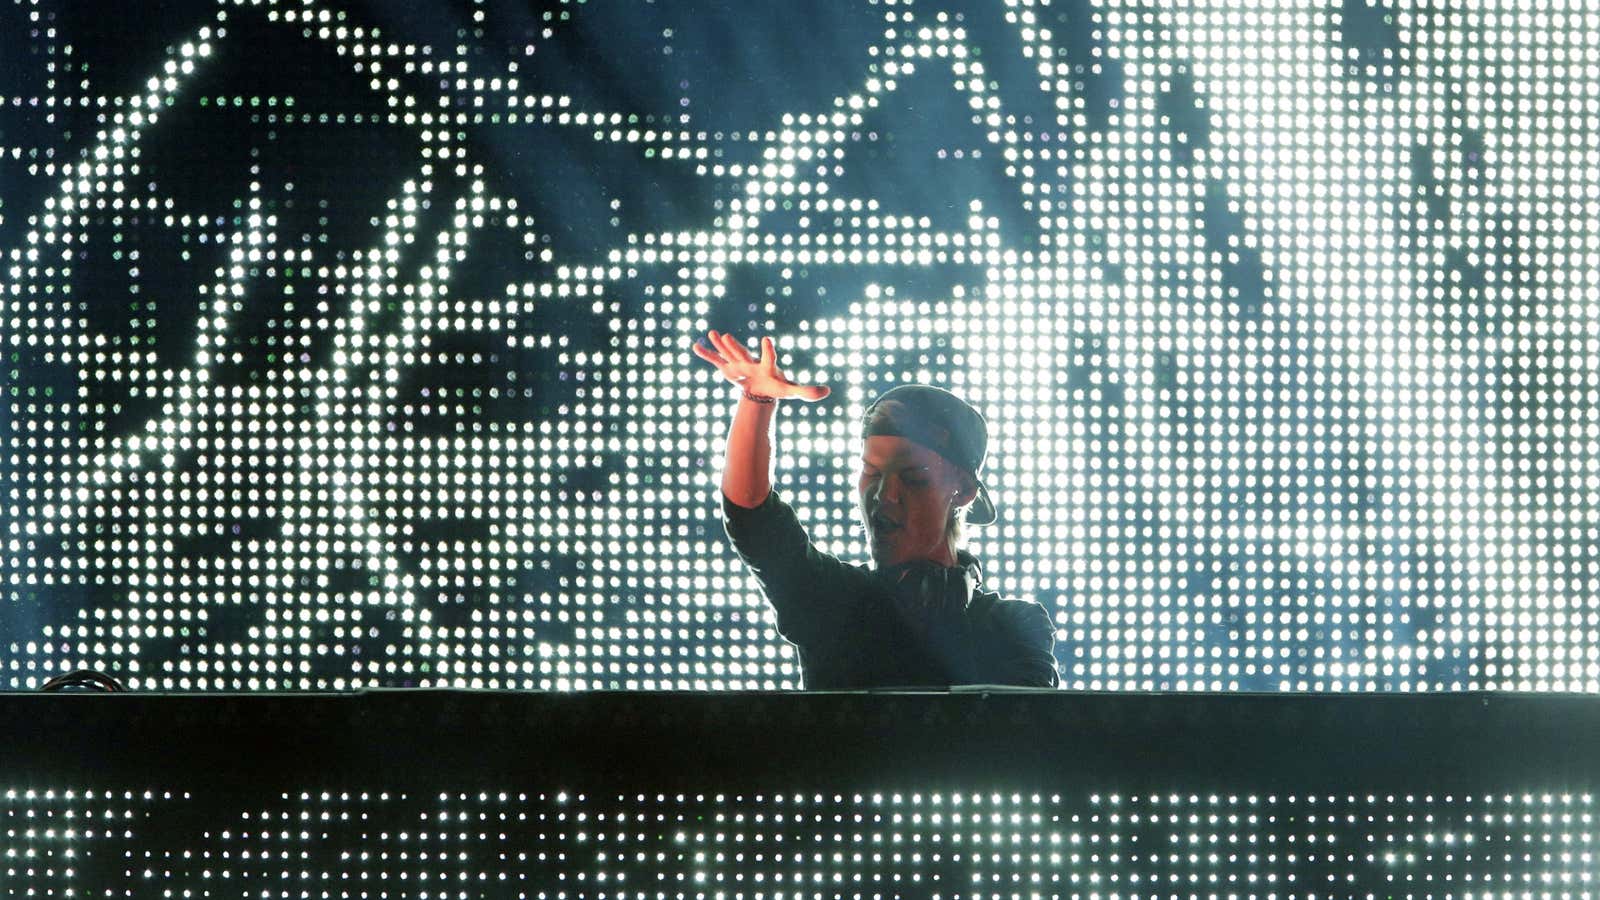 Avicii dazzled crowds during his short career as a pioneering dance music DJ.